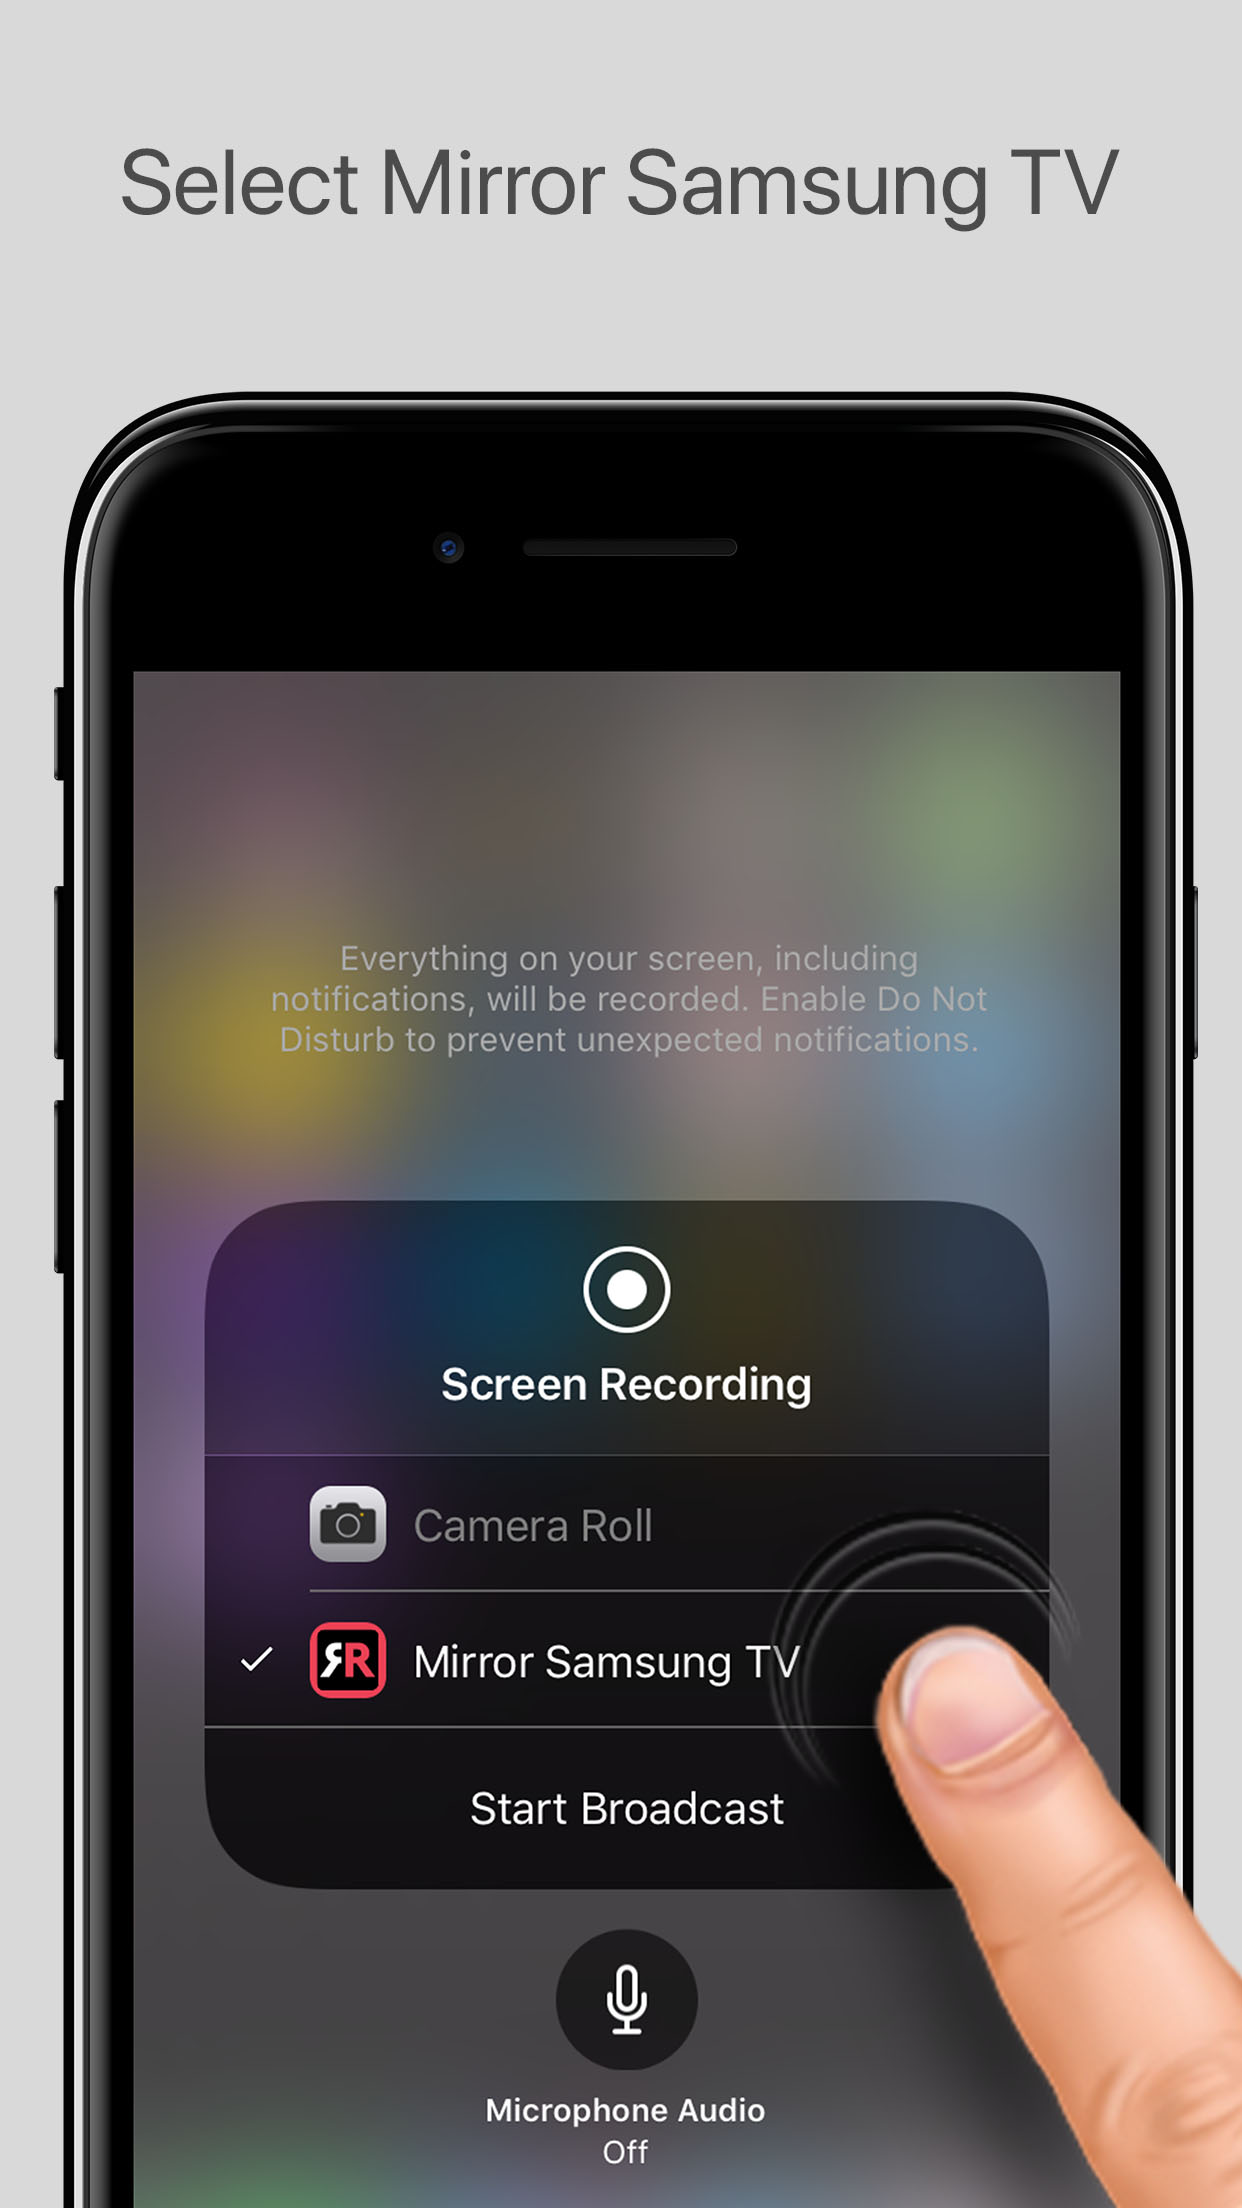 Mirror Your Iphone Or Ipad On A Smart Tv, How To Mirror Apple Screen On Samsung Tv